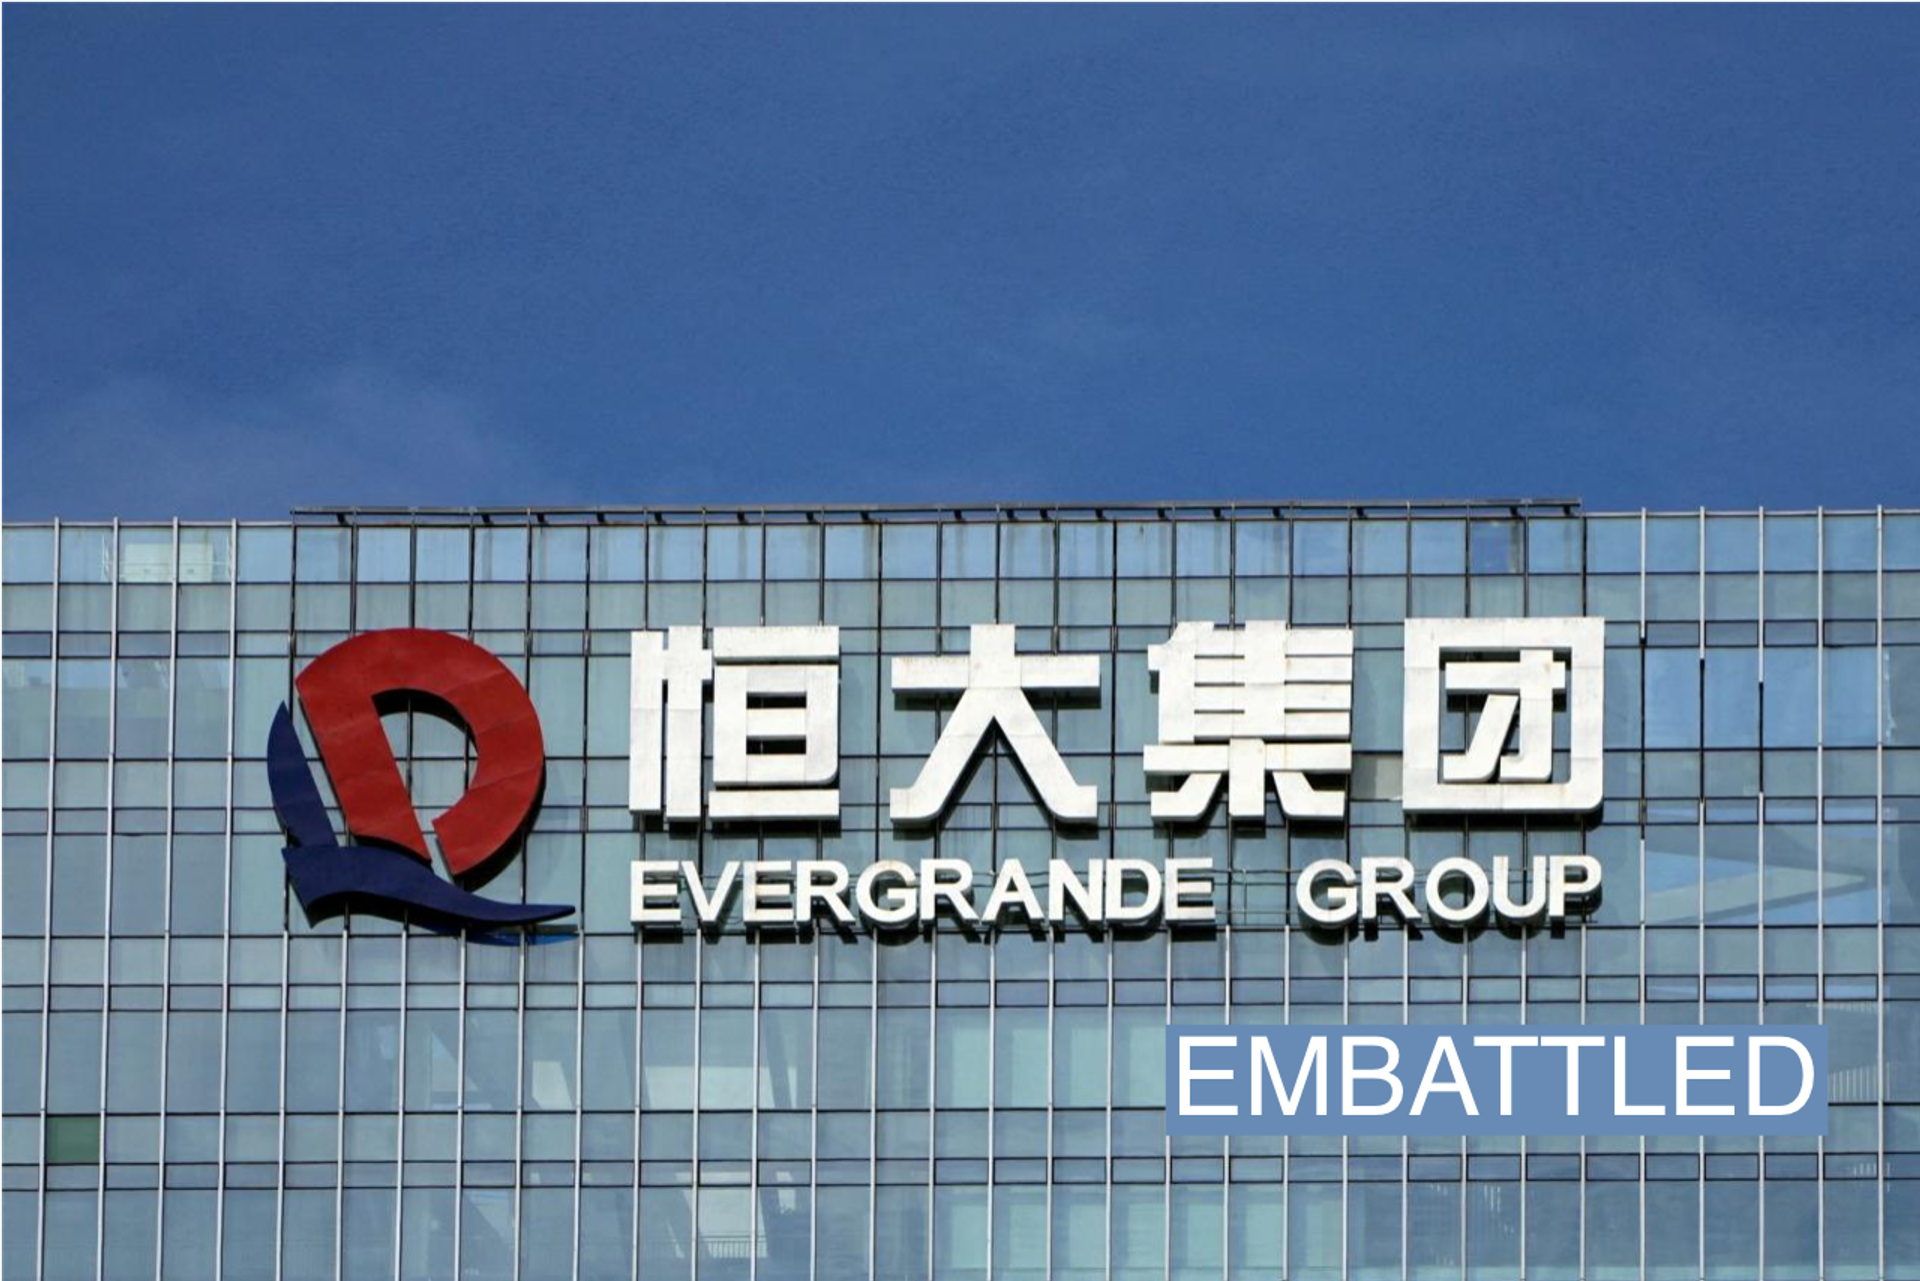 The company logo is seen on the headquarters of China Evergrande Group in Shenzhen, Guangdong province, China September 26, 2021. REUTERS/Aly Song/File Photo